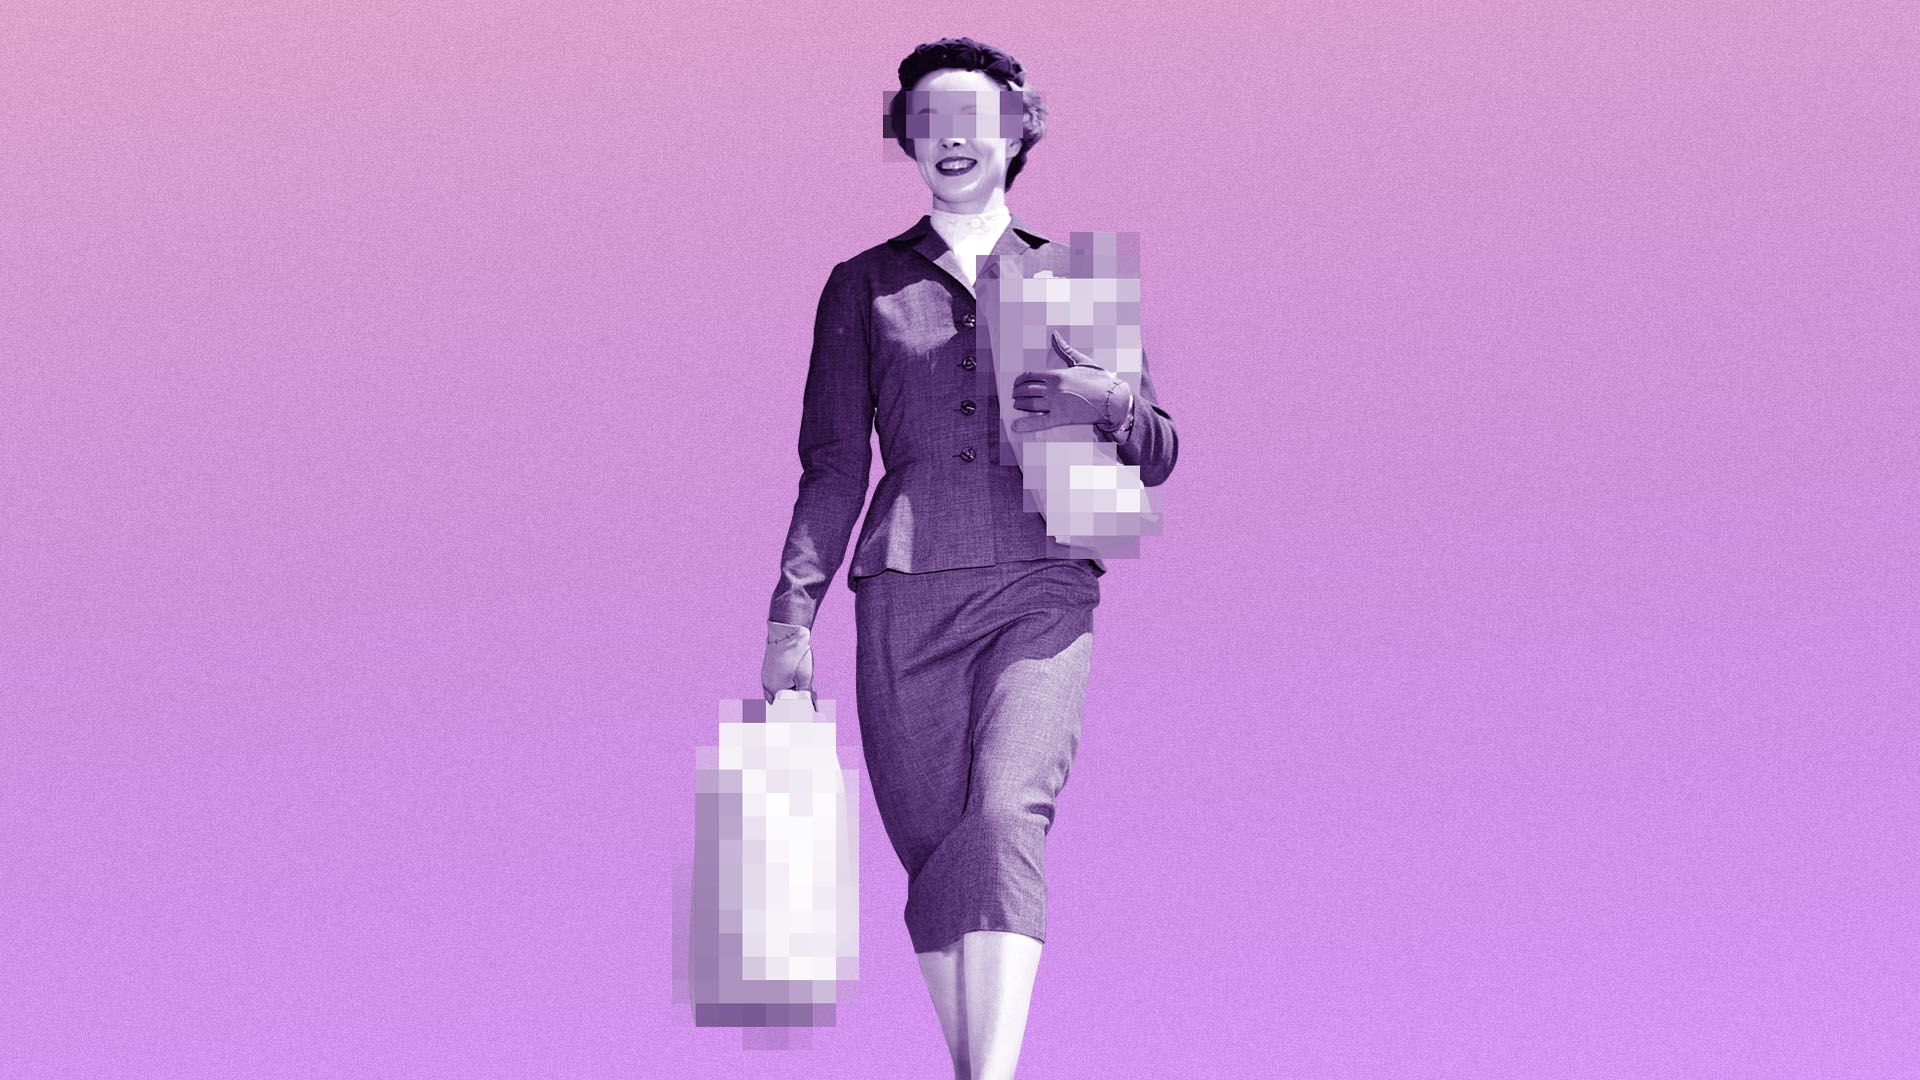 Illustration of a woman with her face and shopping bags pixellated